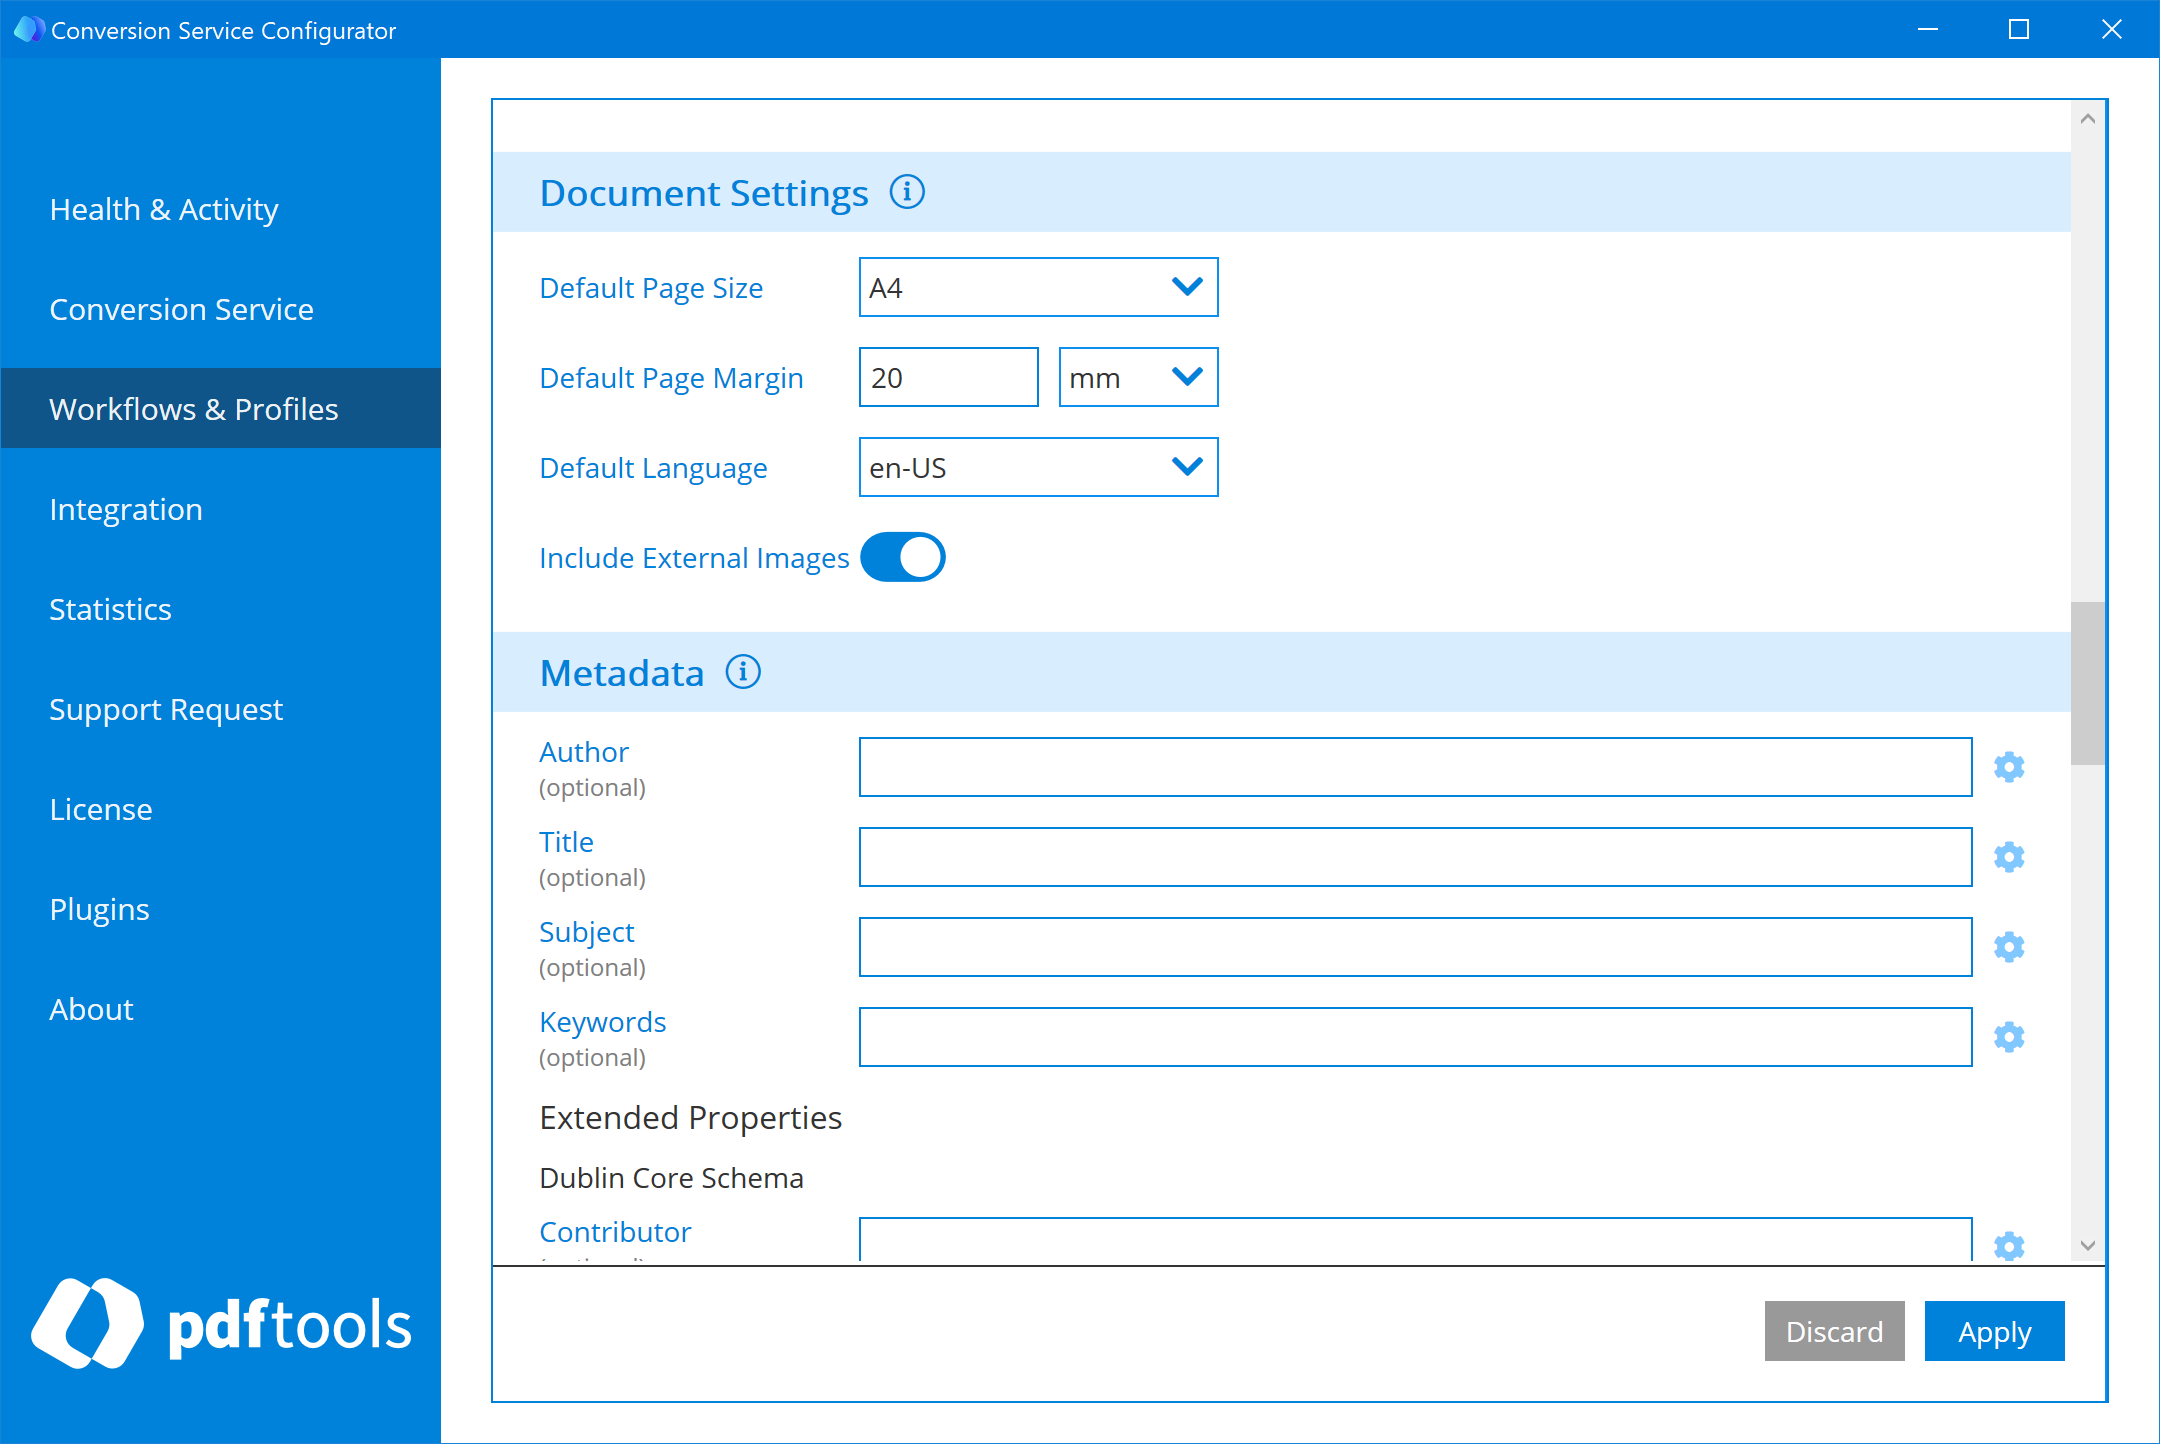 Document Settings section in the profile configuration